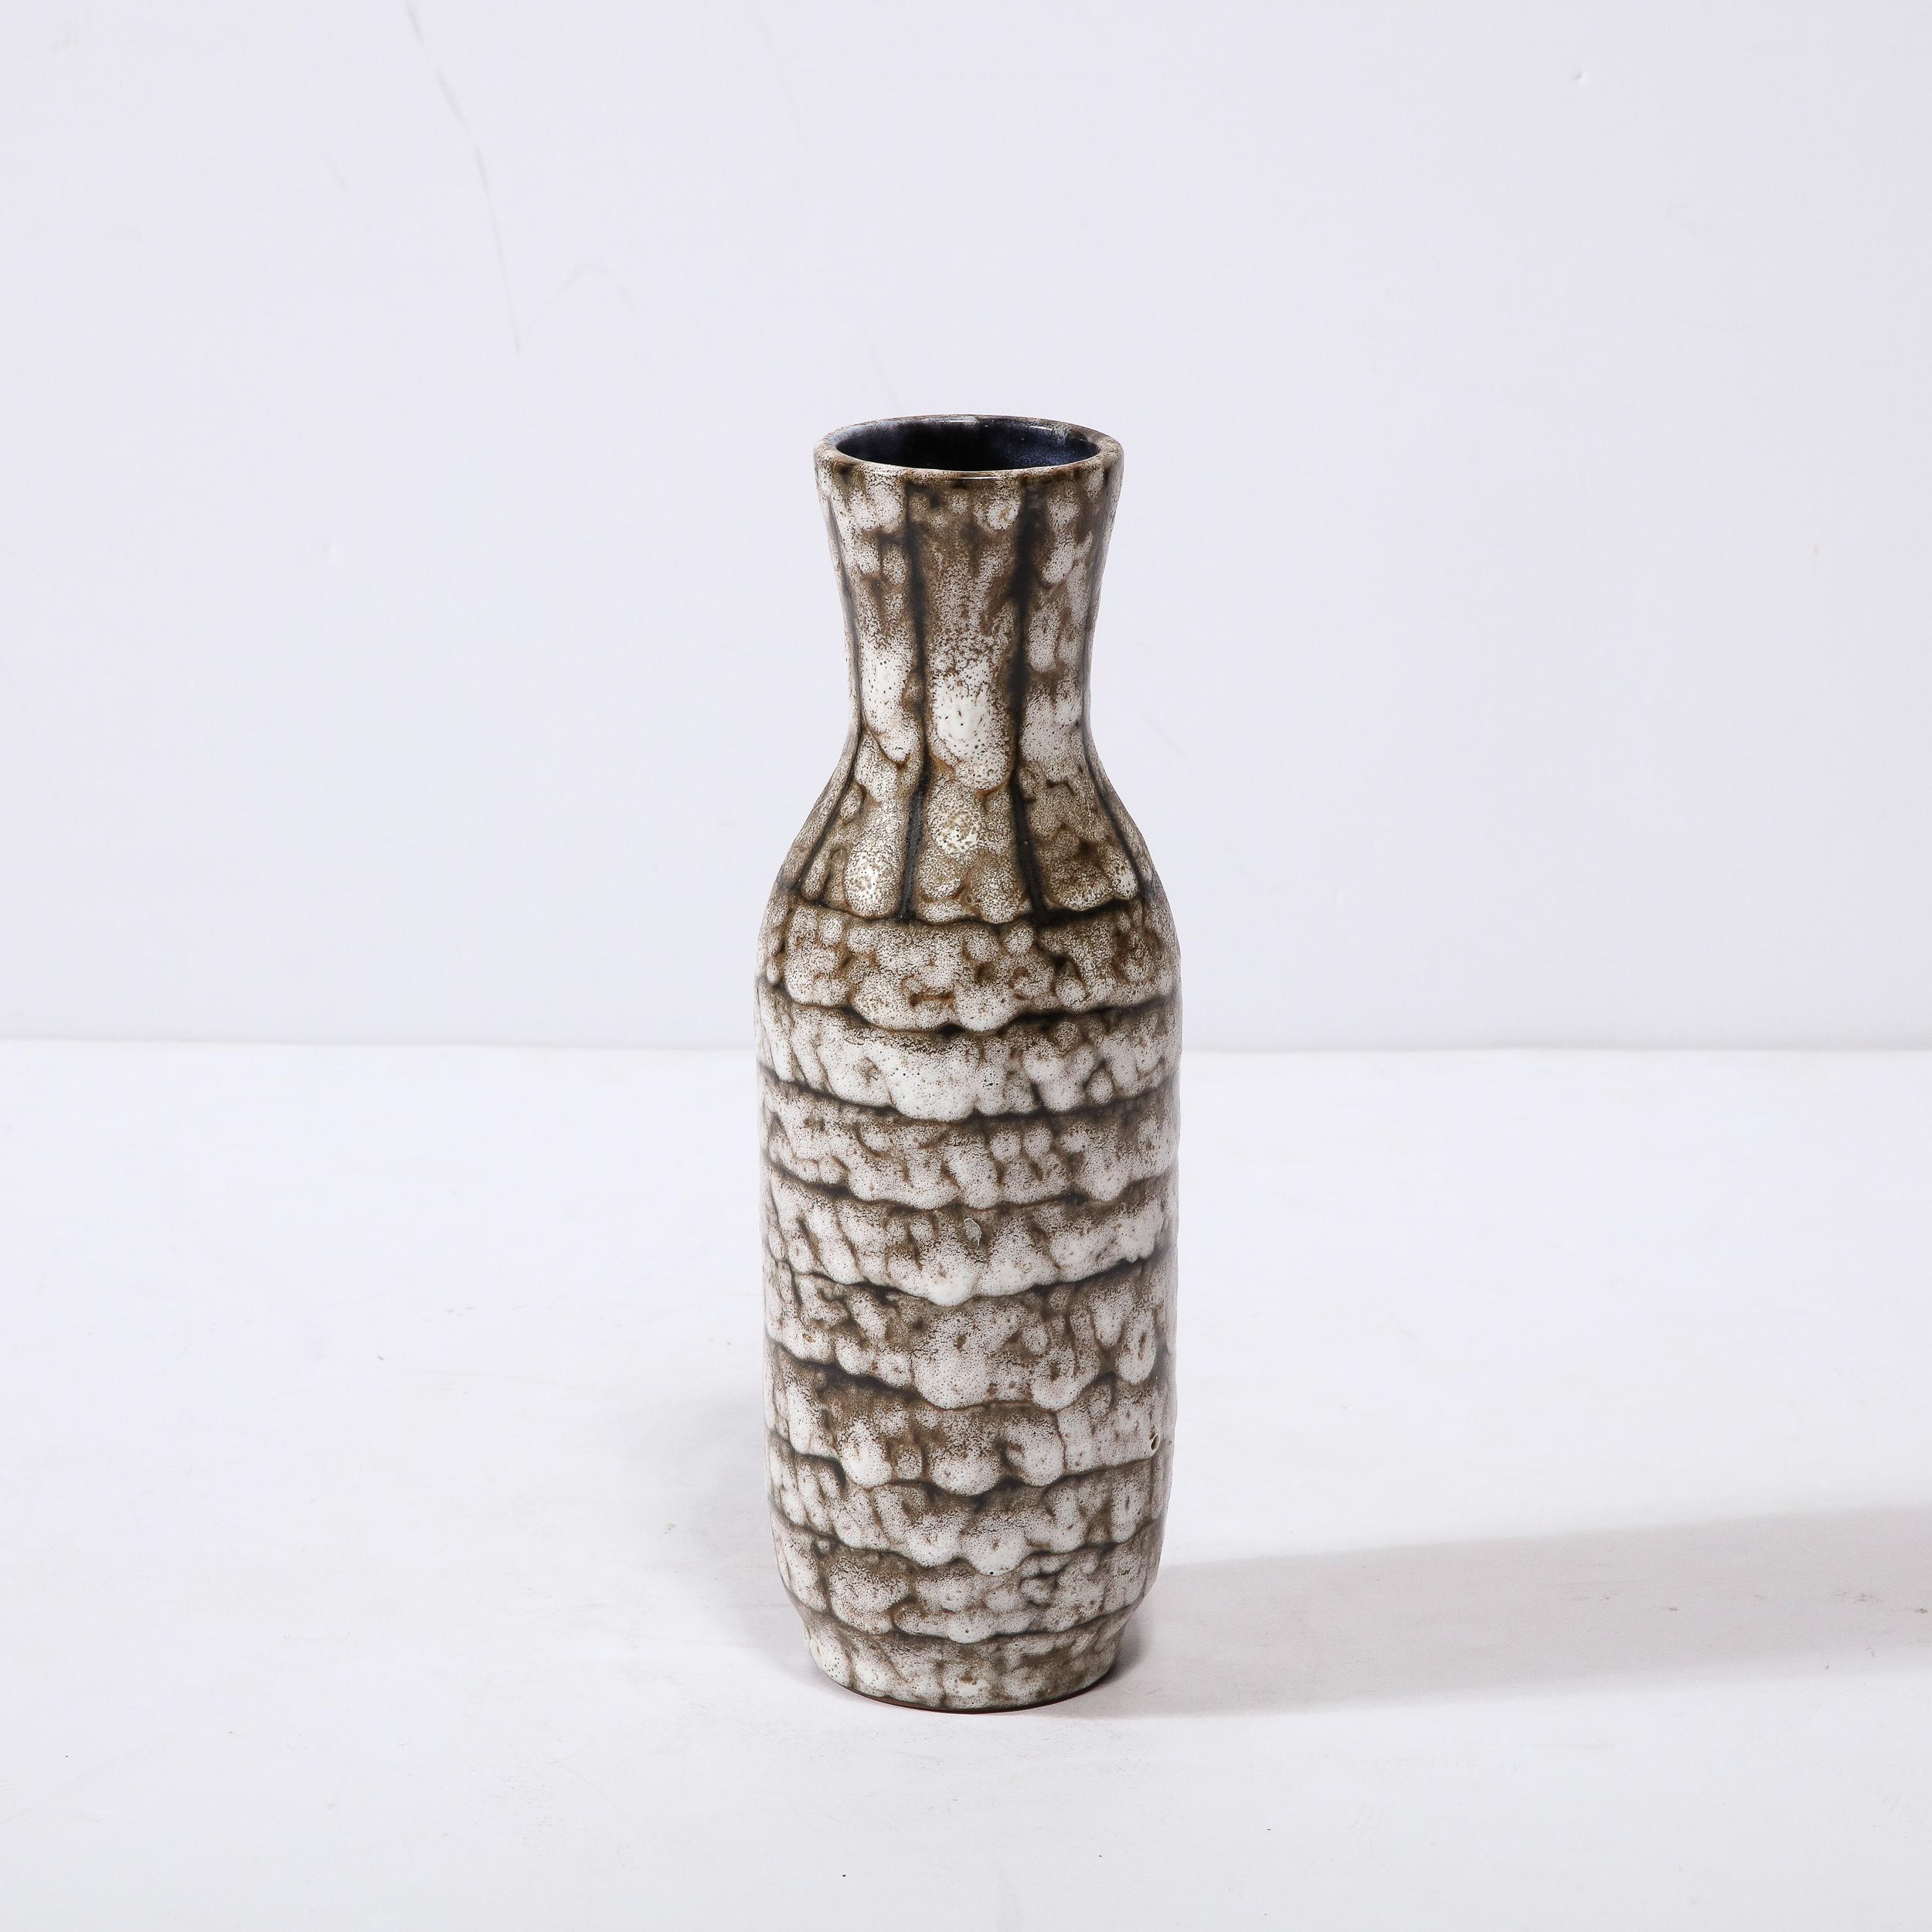 This Mid-Century Modernist Ceramic Vase With Banded Detailing is a beautiful example of Post War European Ceramics, realized in Hódmezovasarhely Majolikagyár, Hungary Circa 1960. With a Stunning textural finish composed in Cream White and Blackened